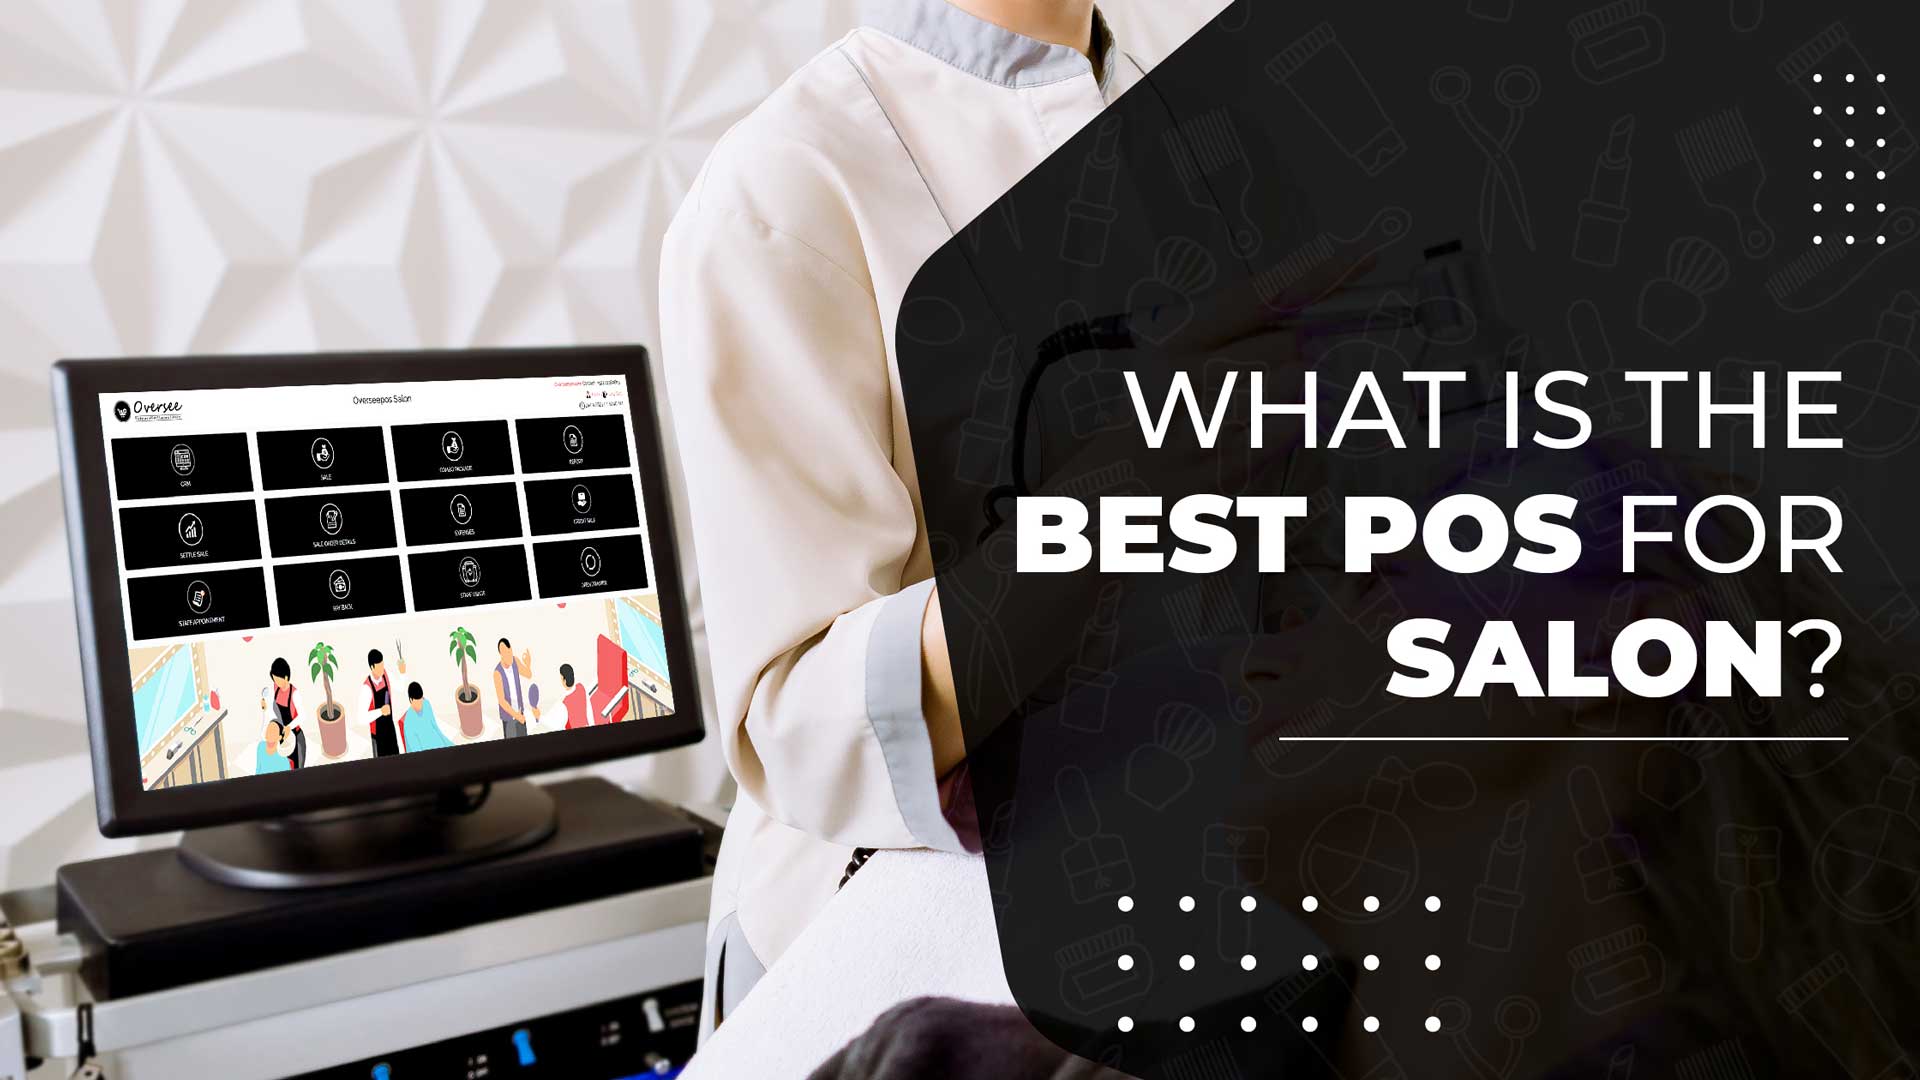 What is the Best POS for Salon?